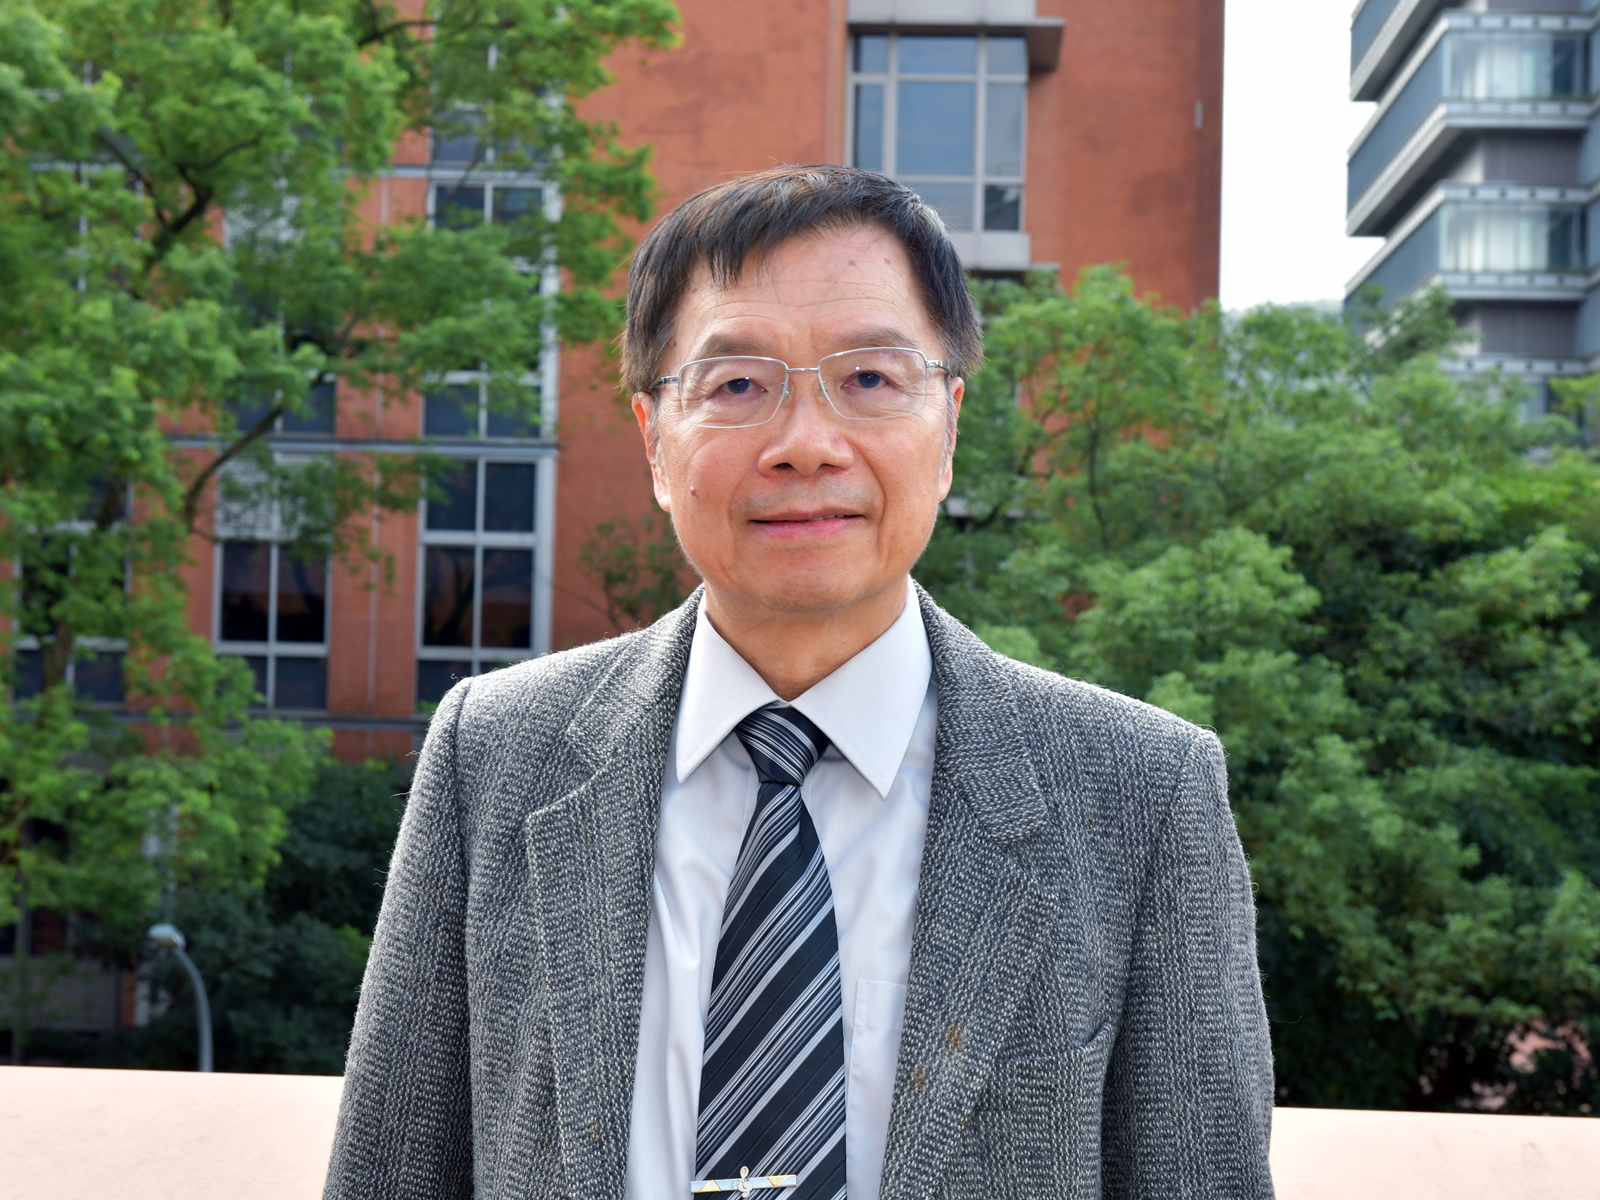 【Press Releases】Academia Sinica Appoints New Vice President in the Division of Life Sciences